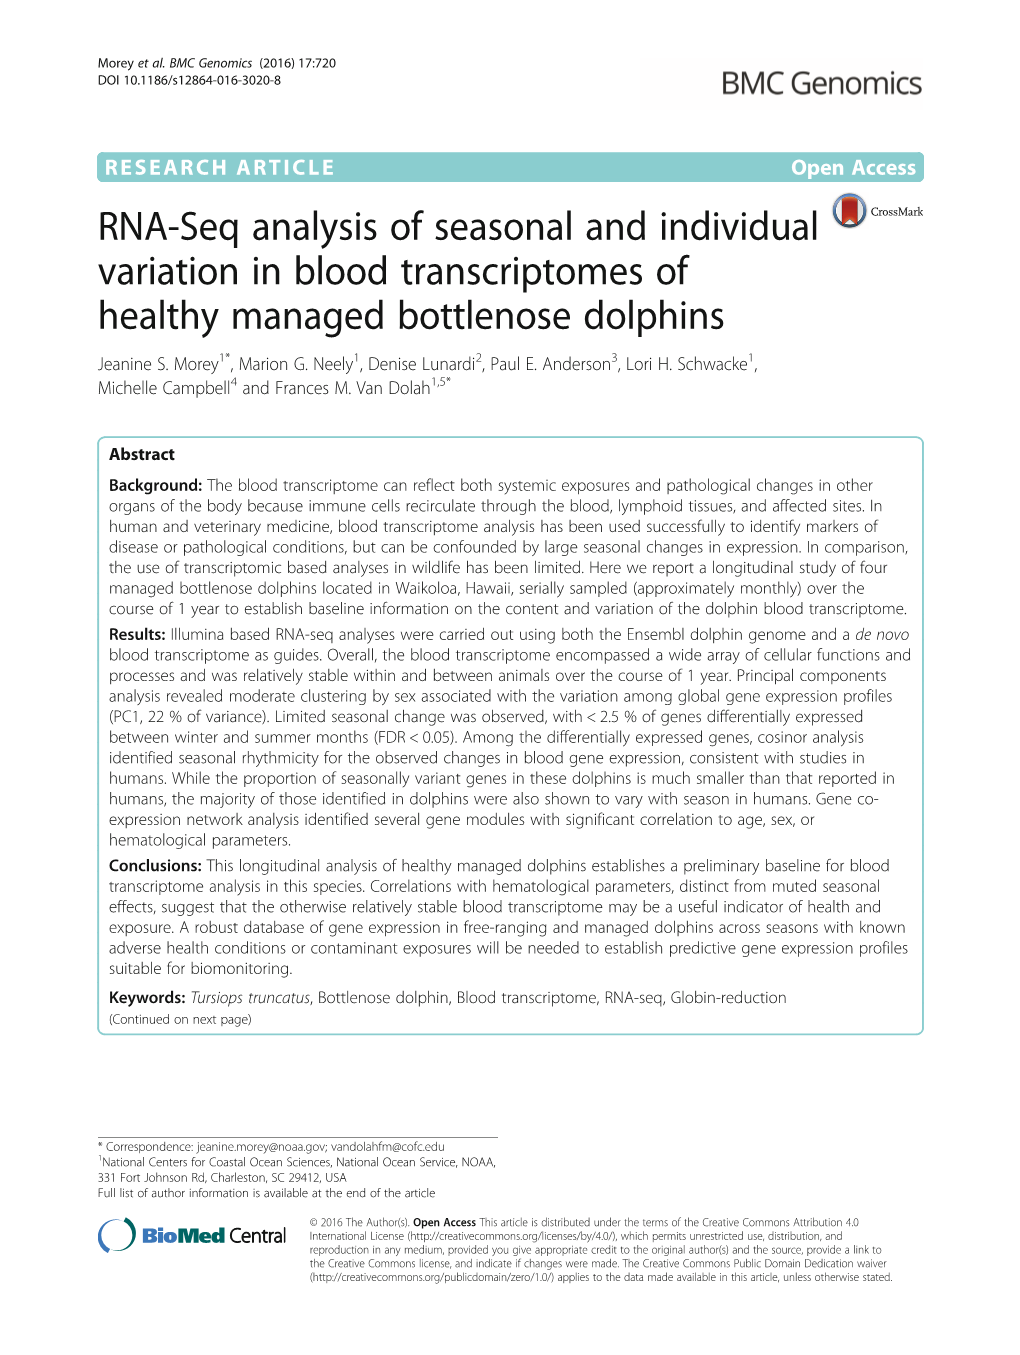 RNA-Seq Analysis of Seasonal and Individual Variation in Blood Transcriptomes of Healthy Managed Bottlenose Dolphins Jeanine S